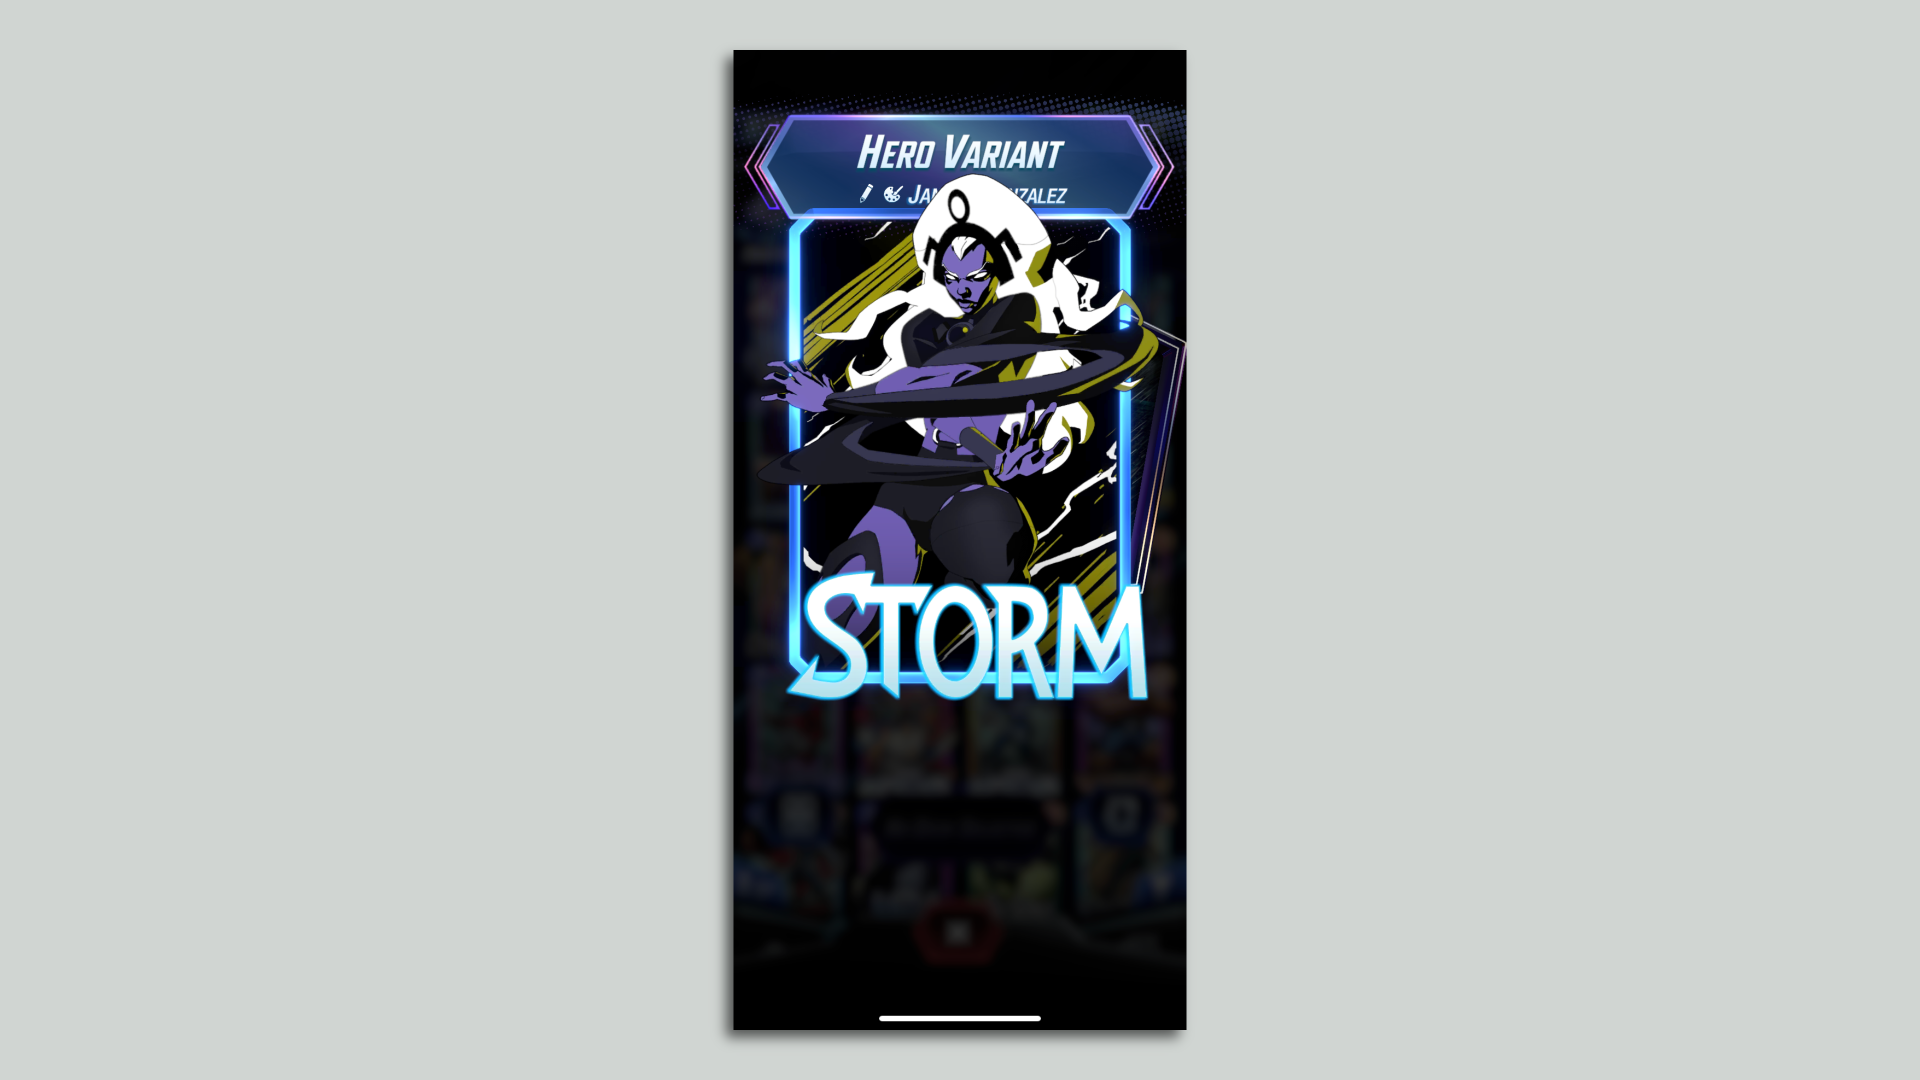 Video game screenshot showing Marvel hero Storm's head obscuring the name of the artist who illustrated her virtual playing card